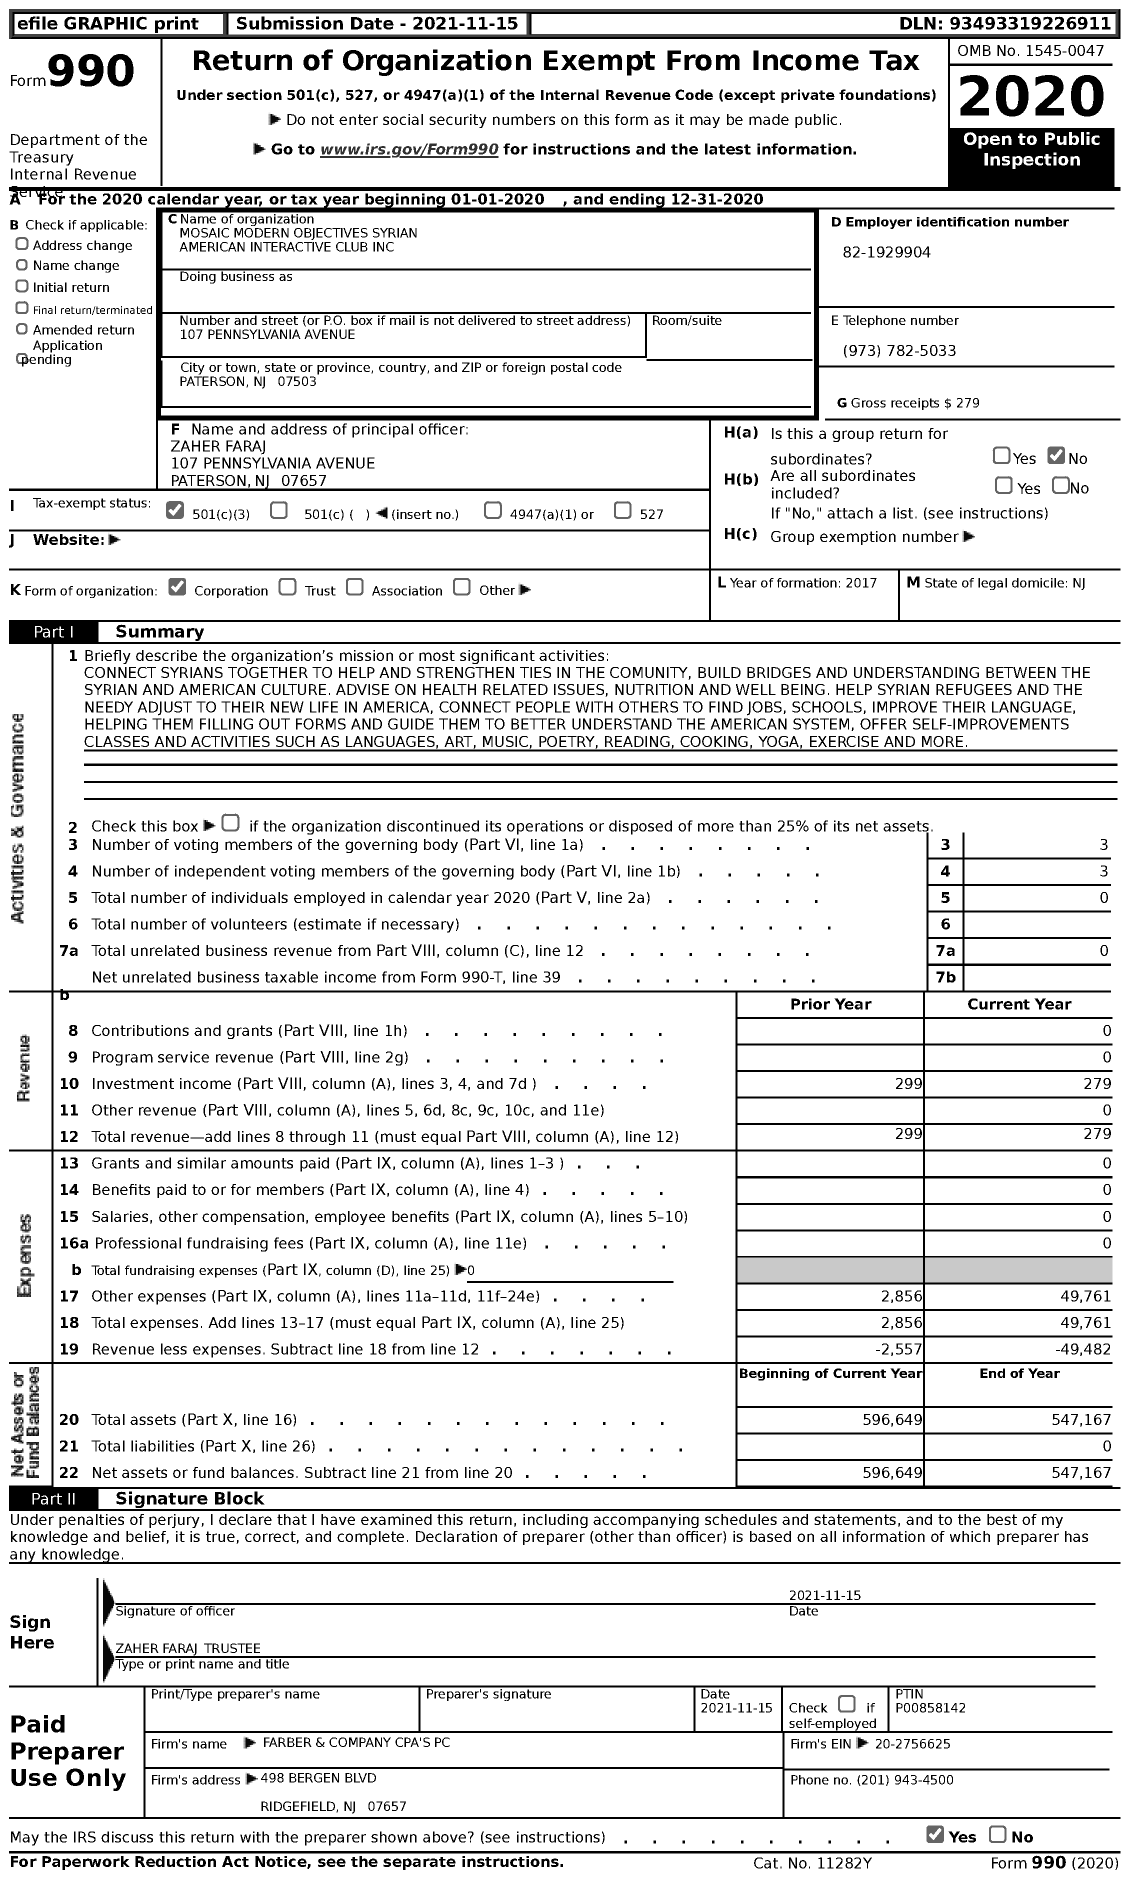 Image of first page of 2020 Form 990 for Mosaic Modern Objectives Syrain American Interactive Club